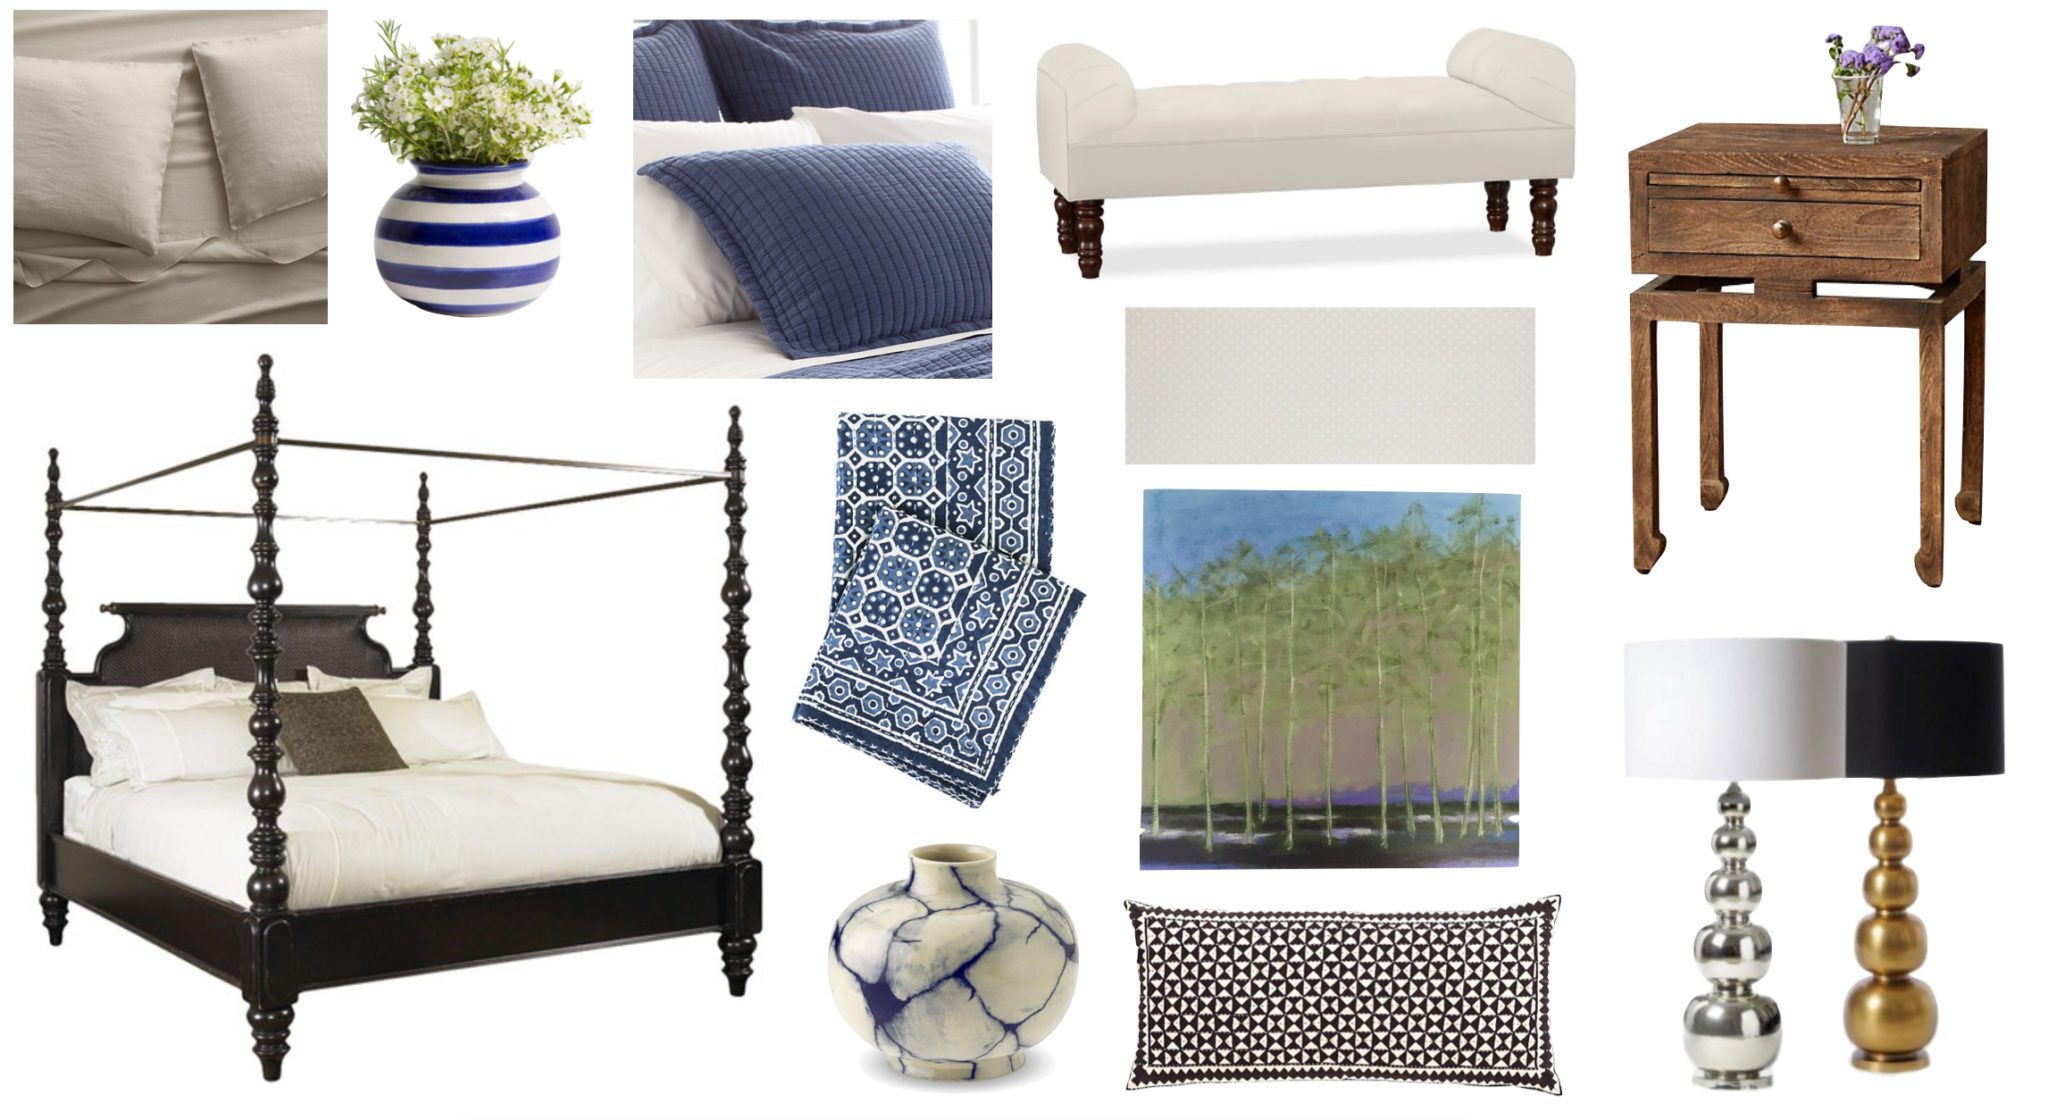 annie selke, masculine, pine cone hill, bedroom, hayneedle, sunny goode, featured image, buying guide, shop, collage, montage